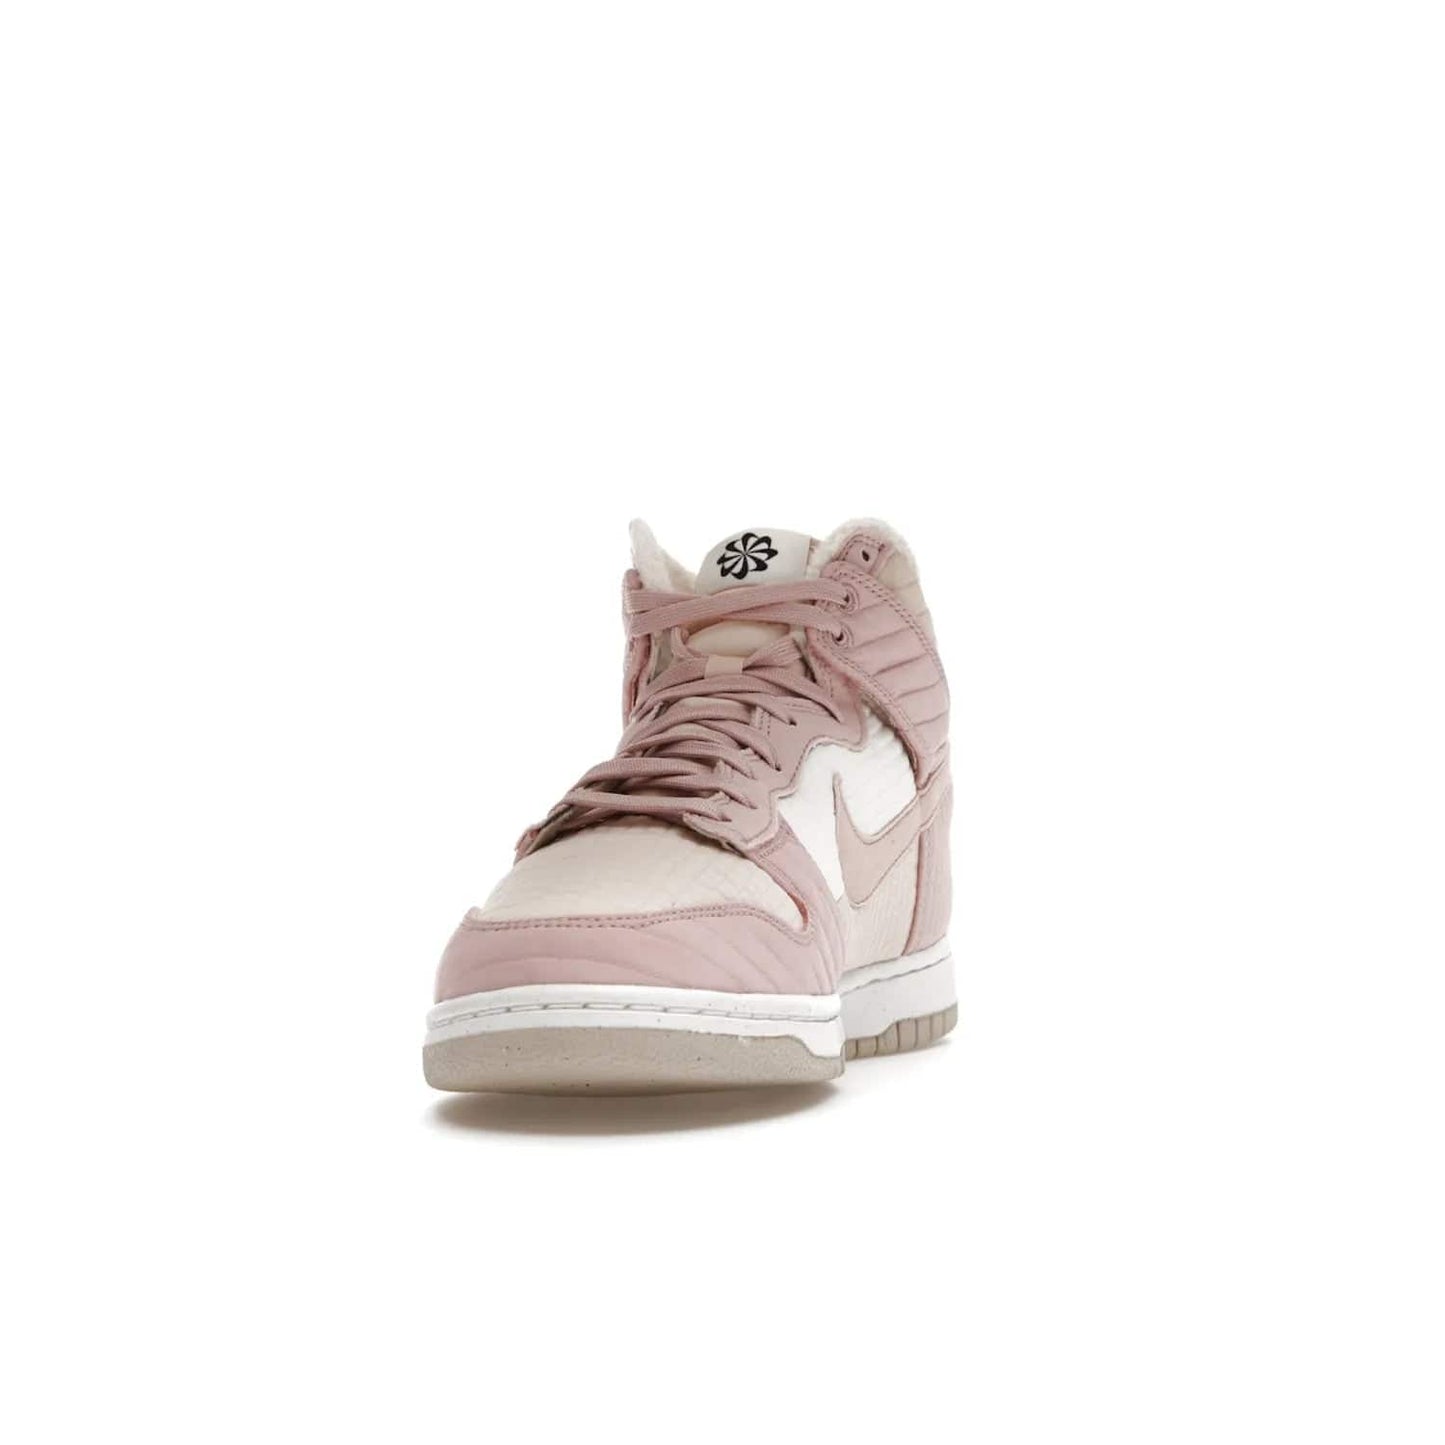 Nike Dunk High LX Next Nature Pink Oxford (Women's) - Image 12 - Only at www.BallersClubKickz.com - Cozy up in the Nike Dunk High LX Next Nature Pink Oxford for Women. Quilted upper, white midsole, soft fleece interior provide warmth and comfort for cold winter nights.